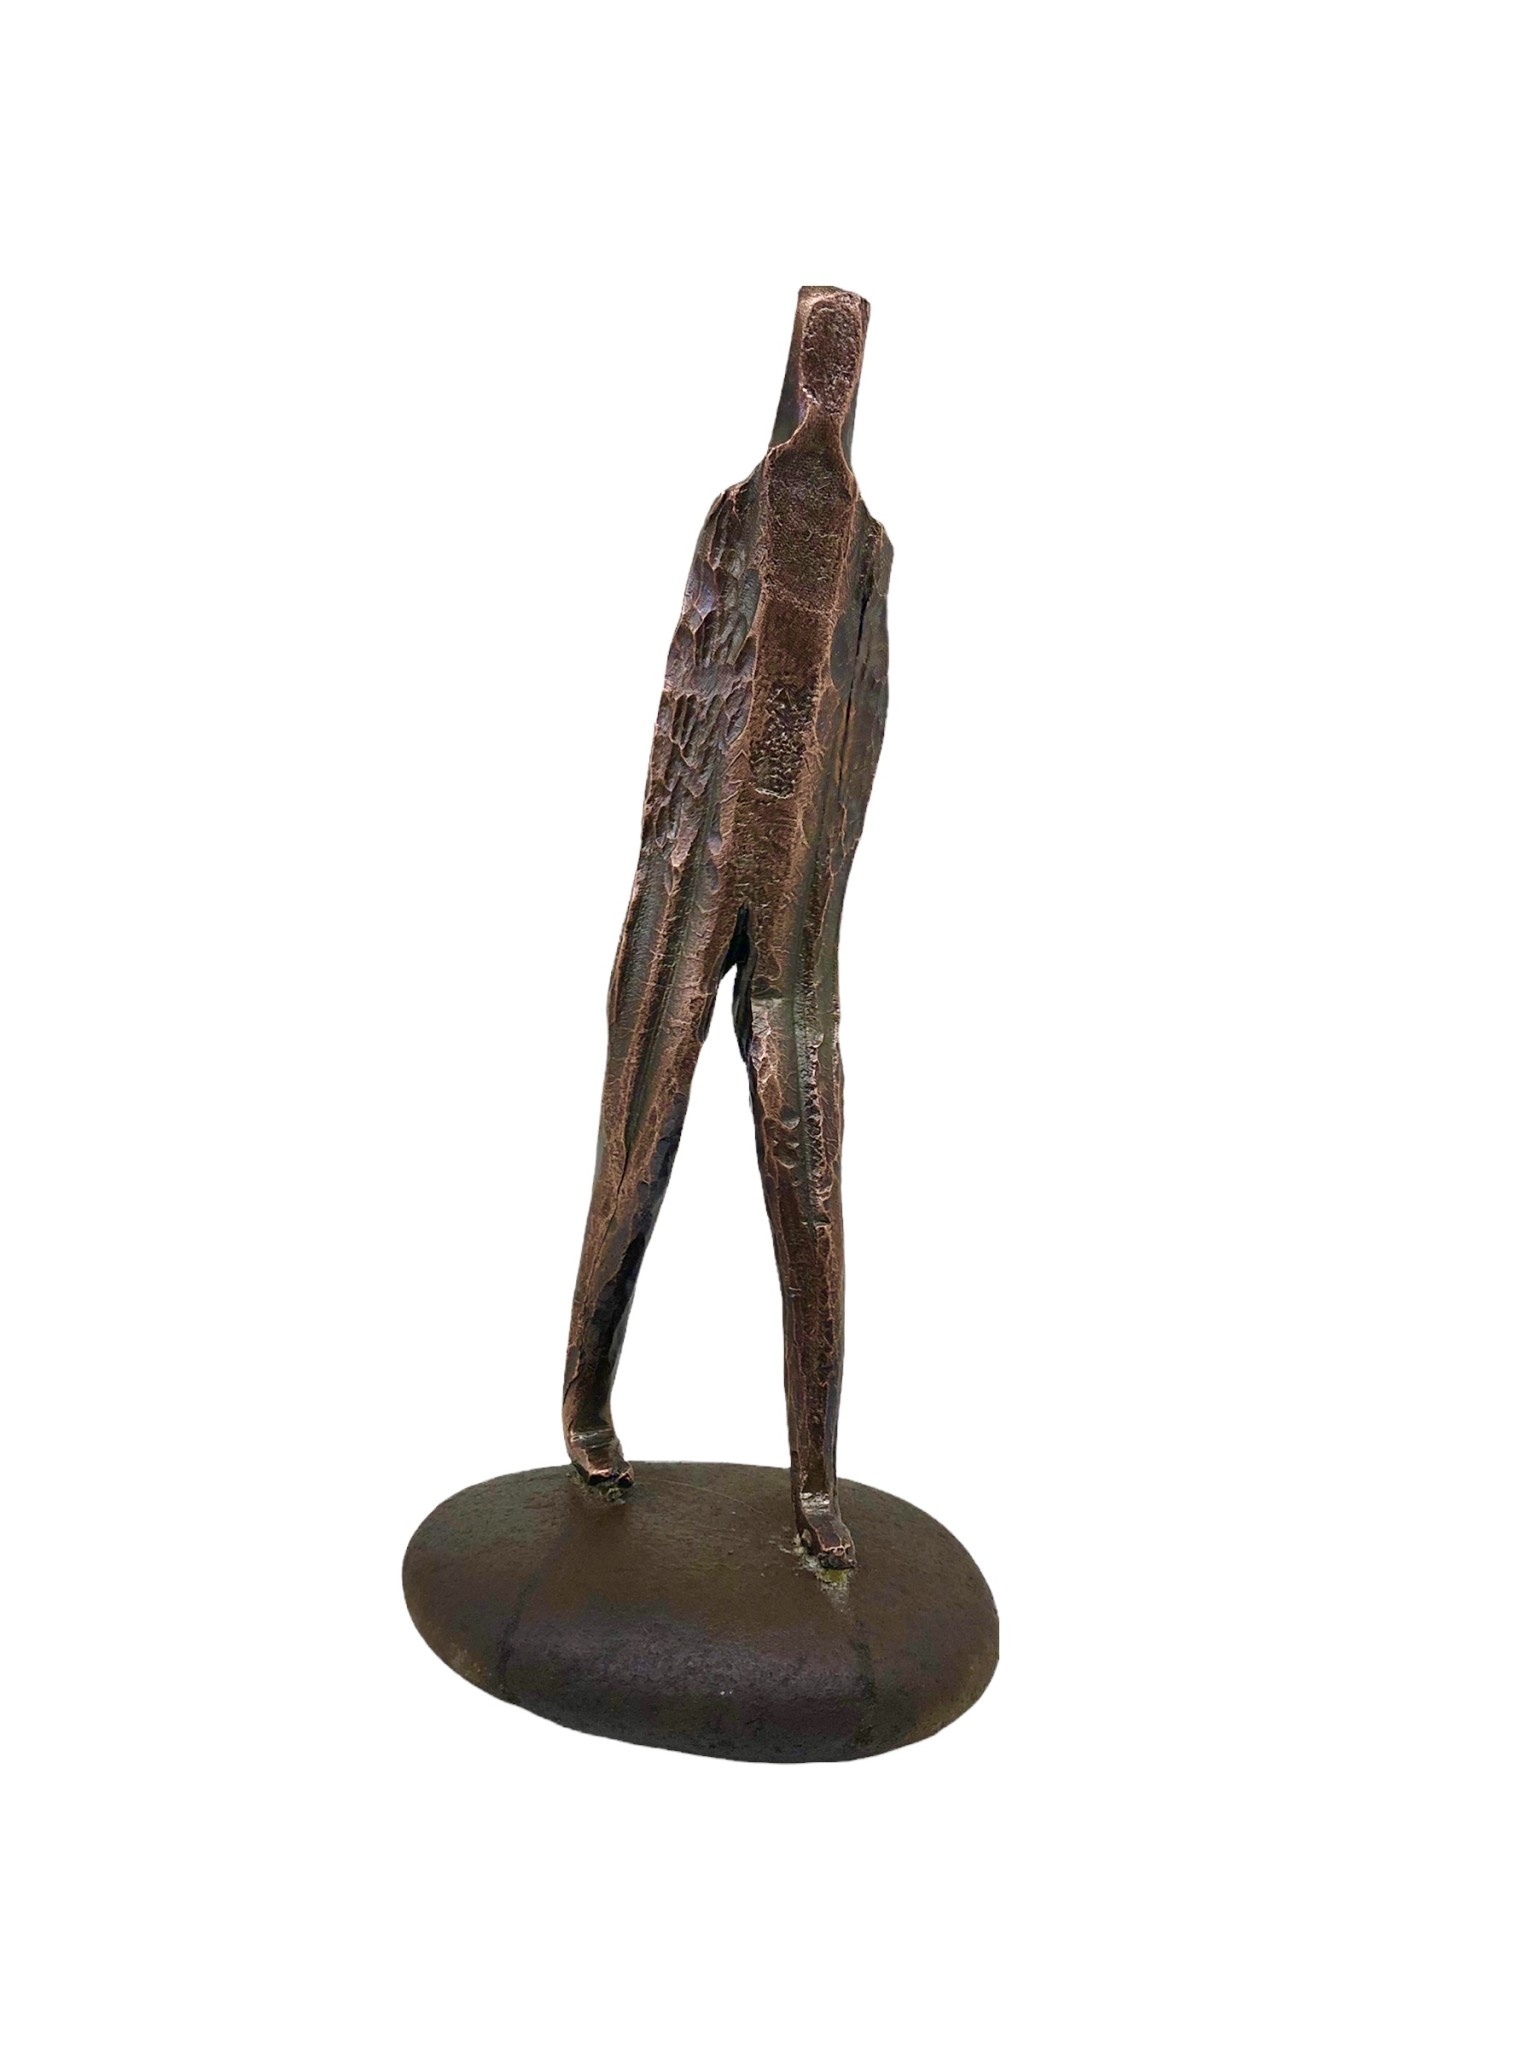 Francesco Petrolo - The Unknown, 2022 - Hand forged iron with copper patina on found rock - 31.5x14.x14cm-1